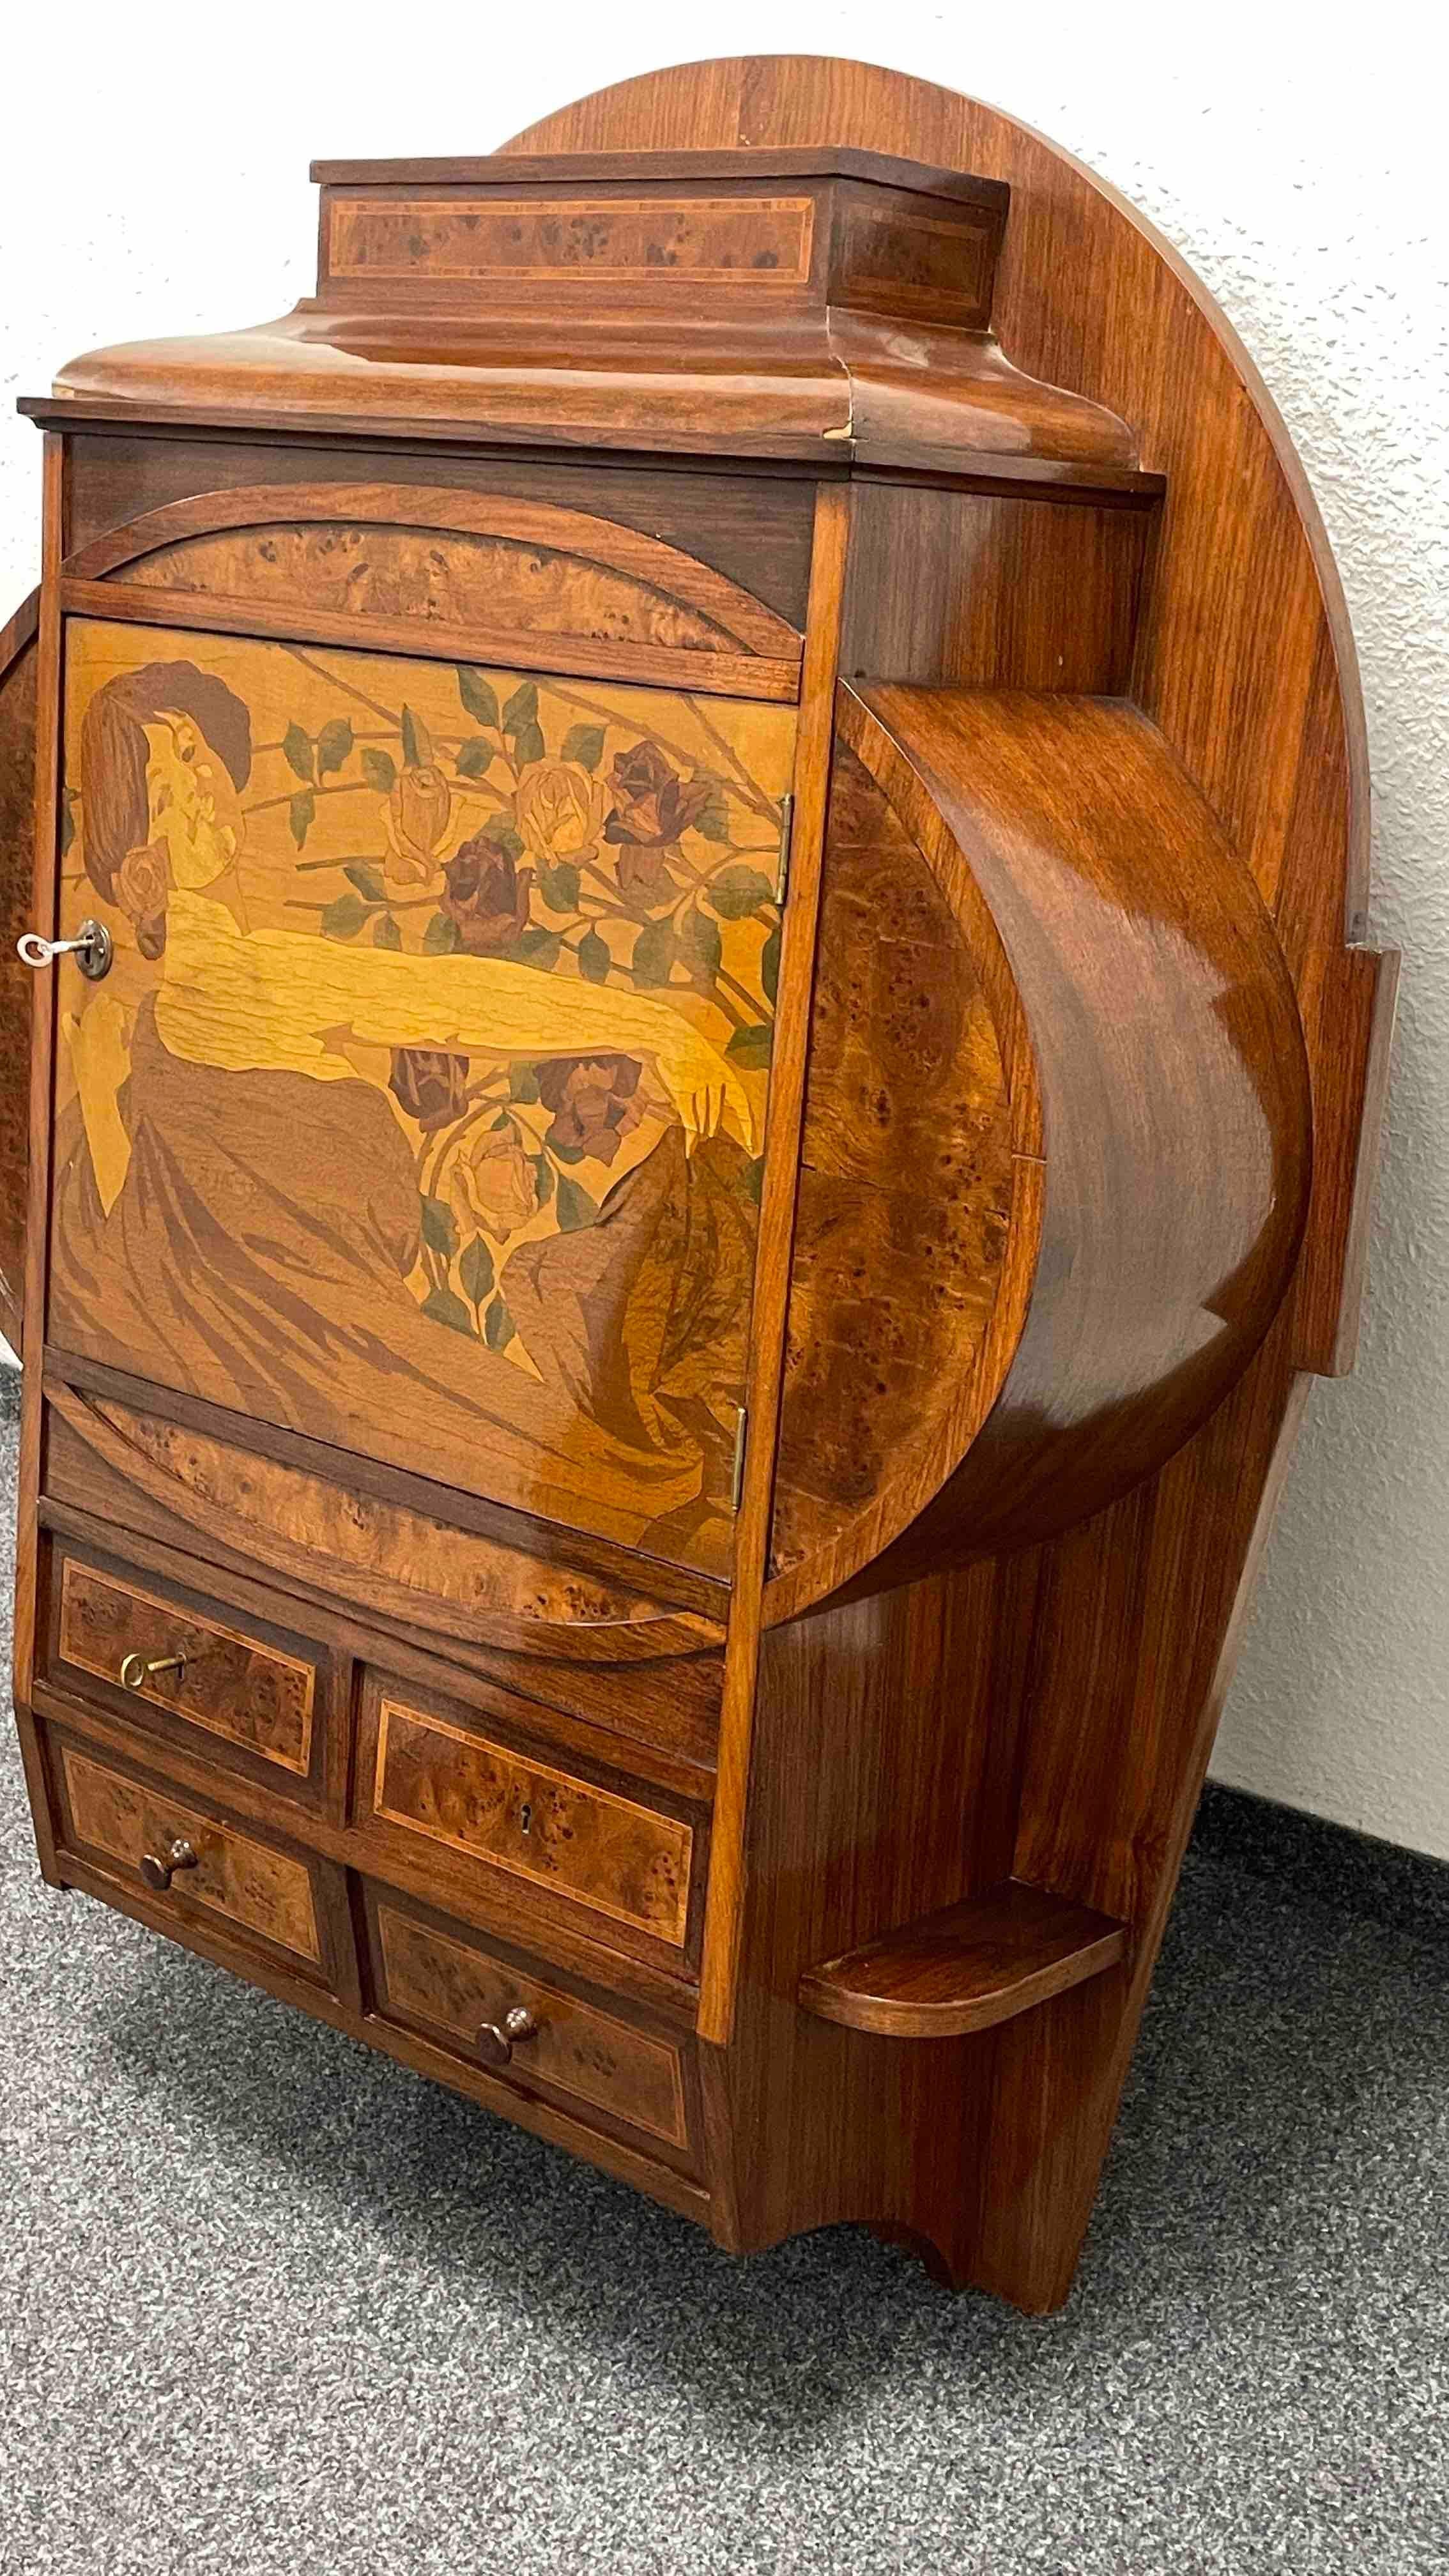 Wall Cabinet with Marquetry Inlays and Drawer Art Nouveau Vienna Austria, 1900s For Sale 6